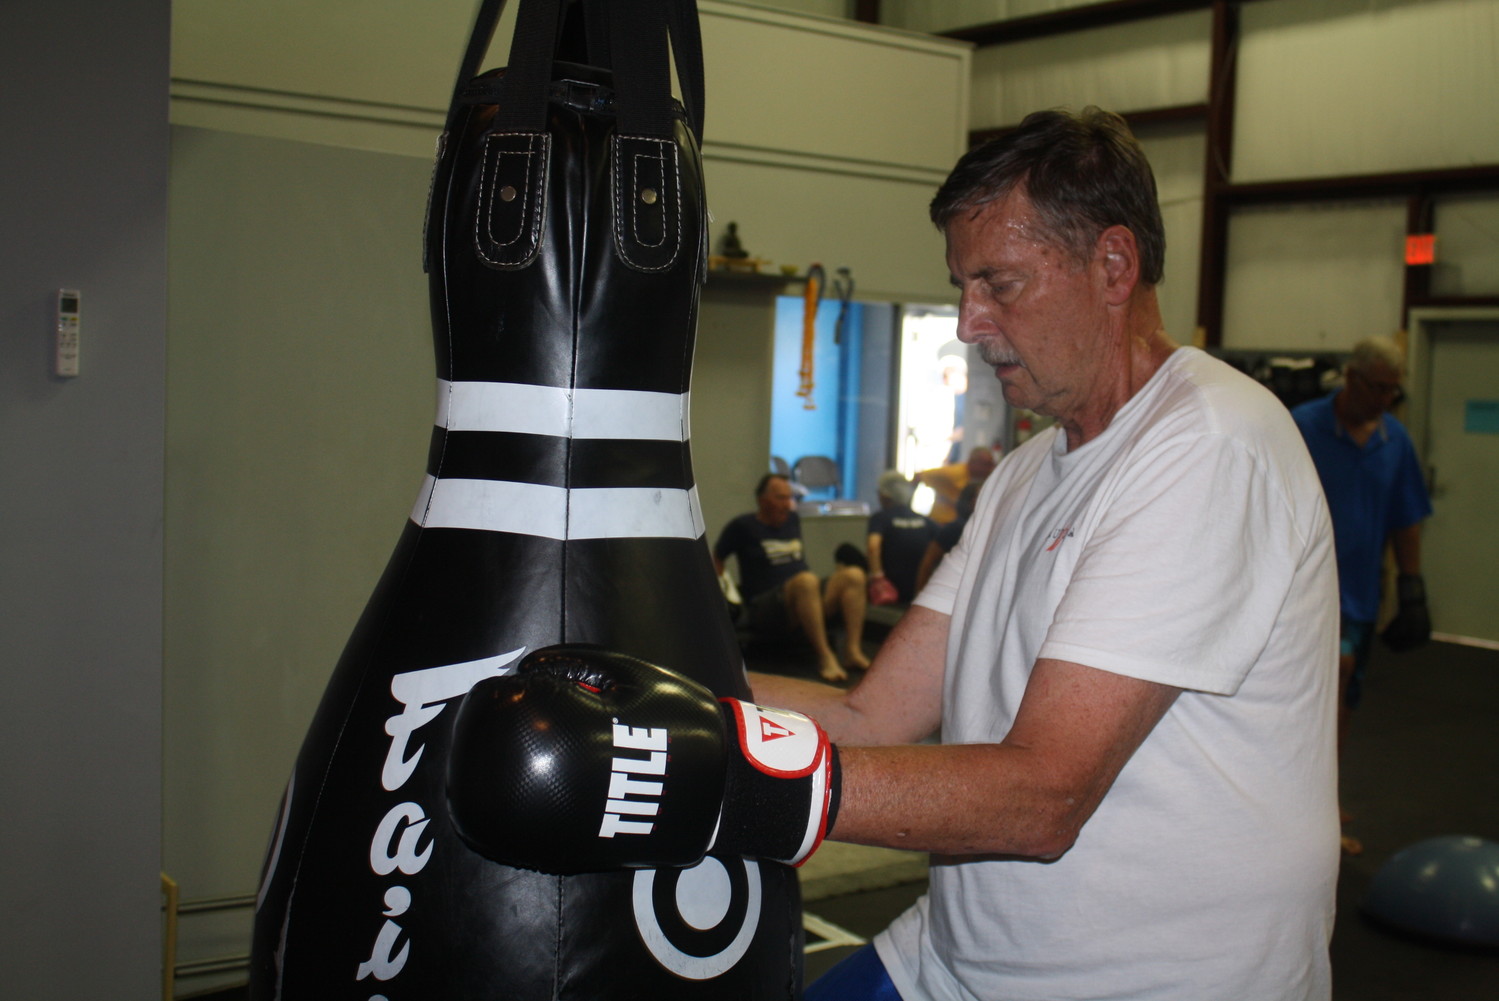 A member of Rock Steady Boxing Jacksonville fights back against Parkinson’s disease.